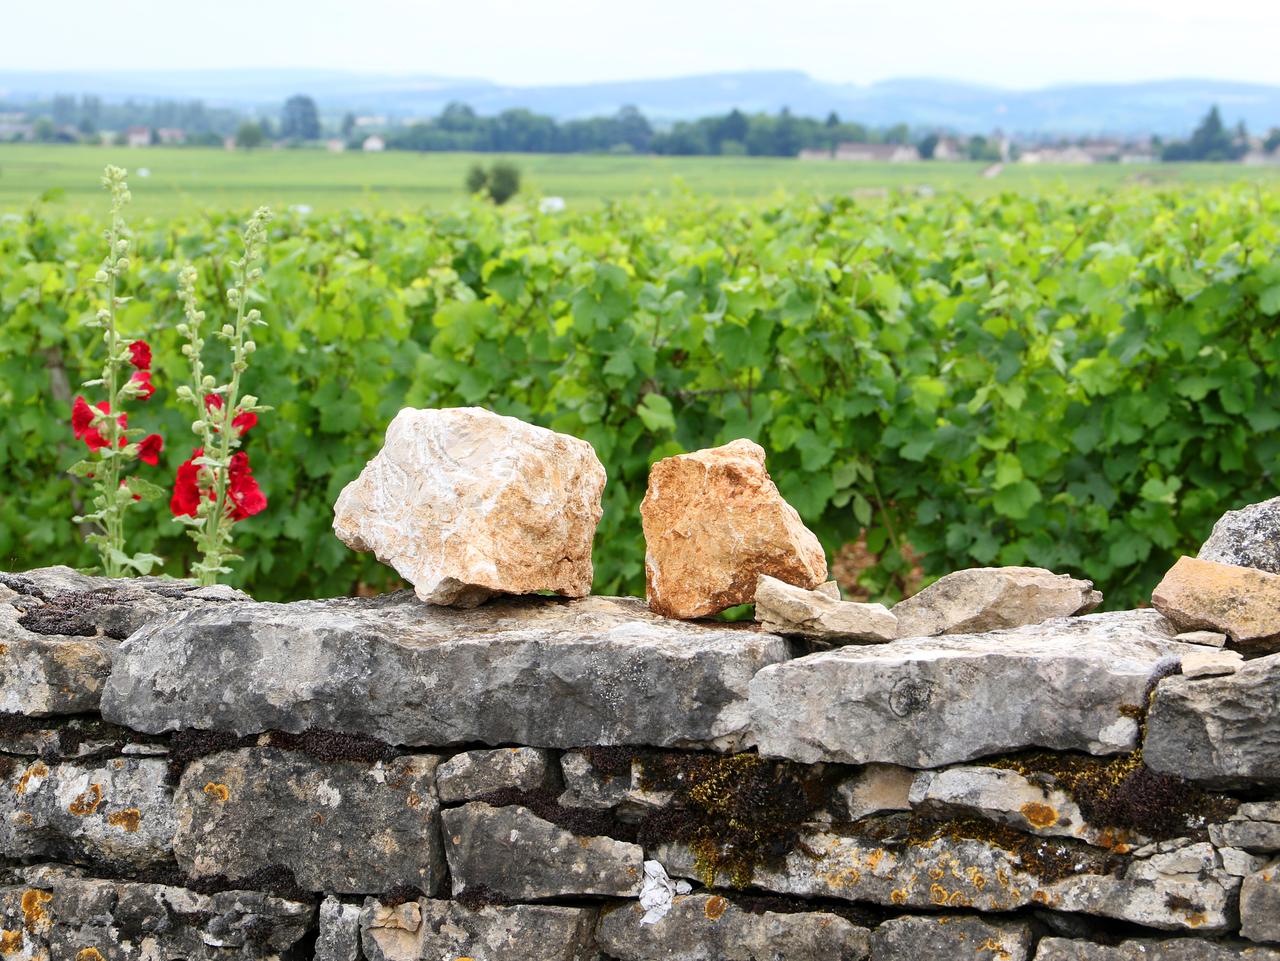 Supplied Travel Burgundy, France. Rocks from a vineyard plot atop a stone wall in Burgundy